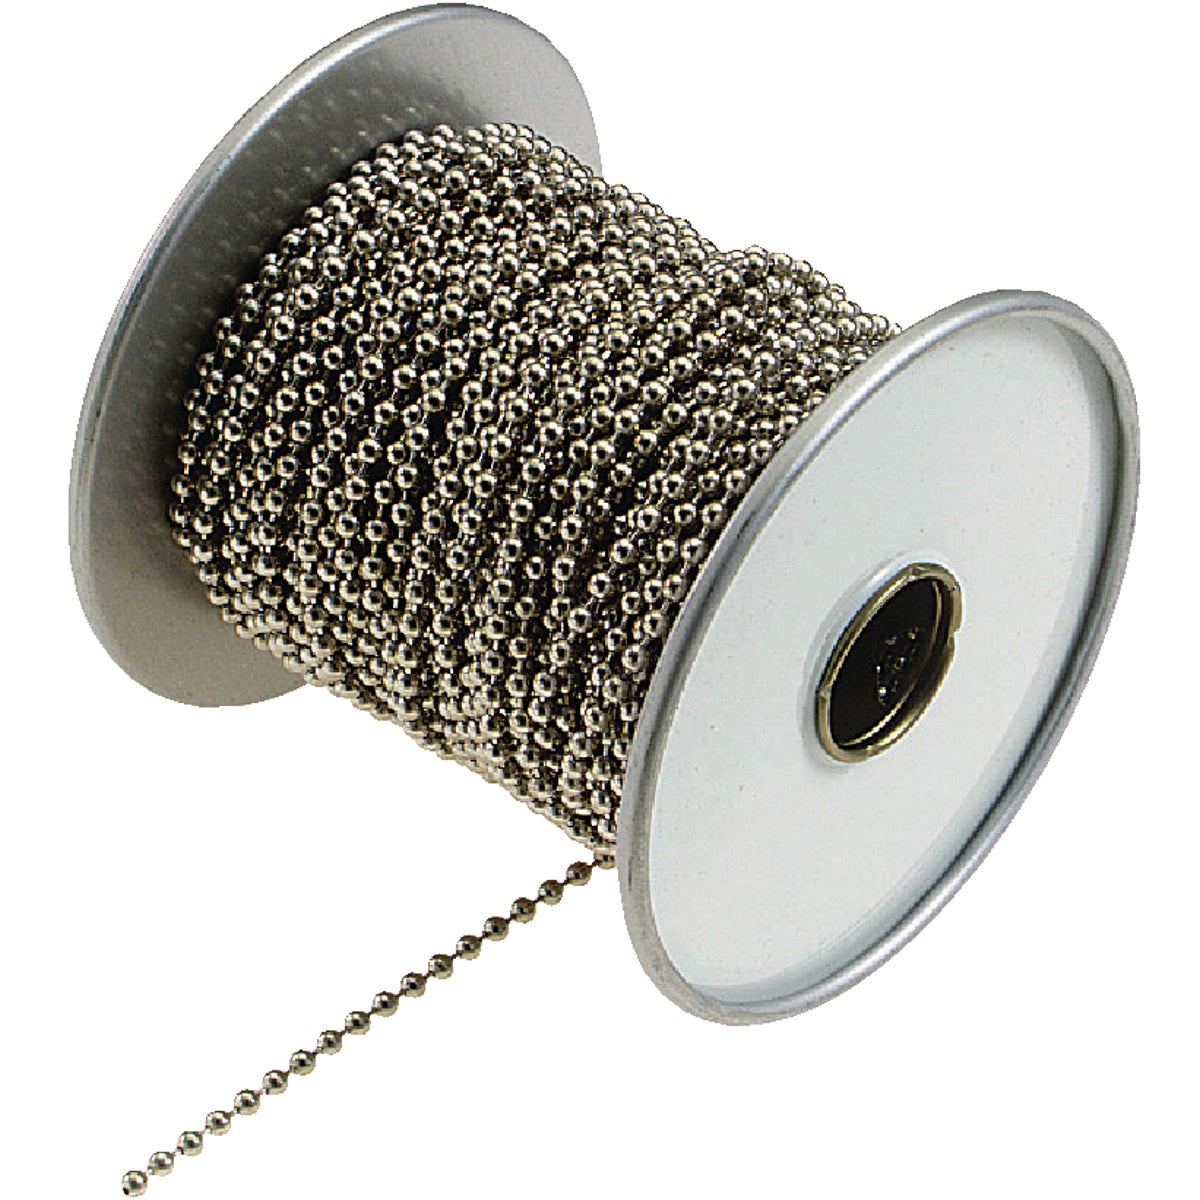 Item 584185, Ball chain can be used for many applications such as: Key chains, electric 